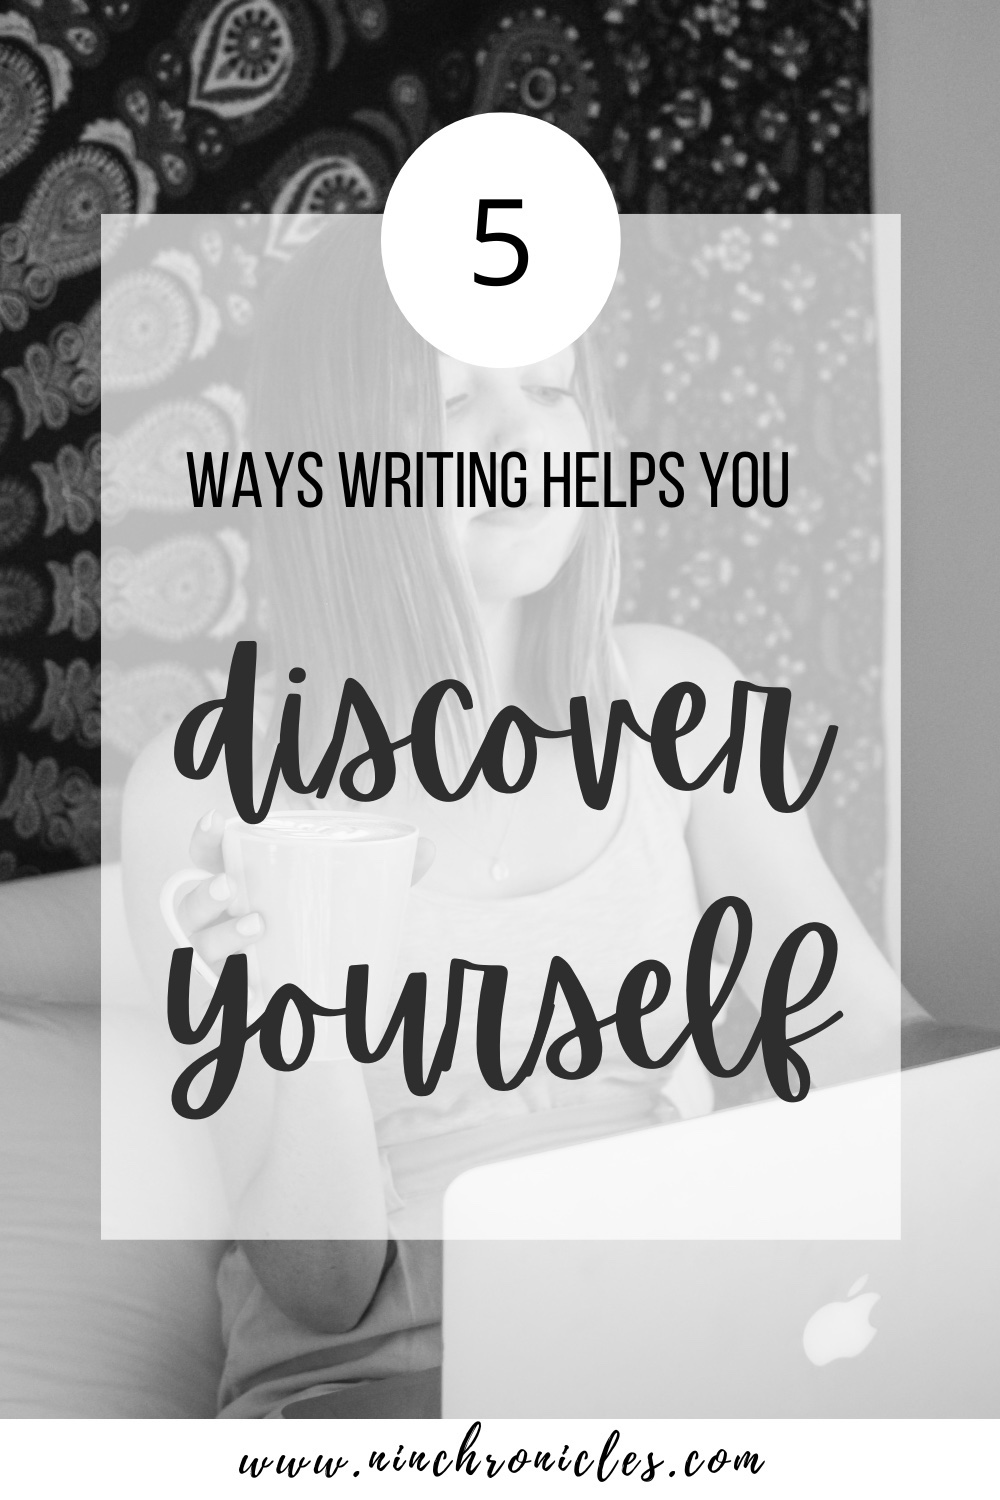 Writing for Personal Growth